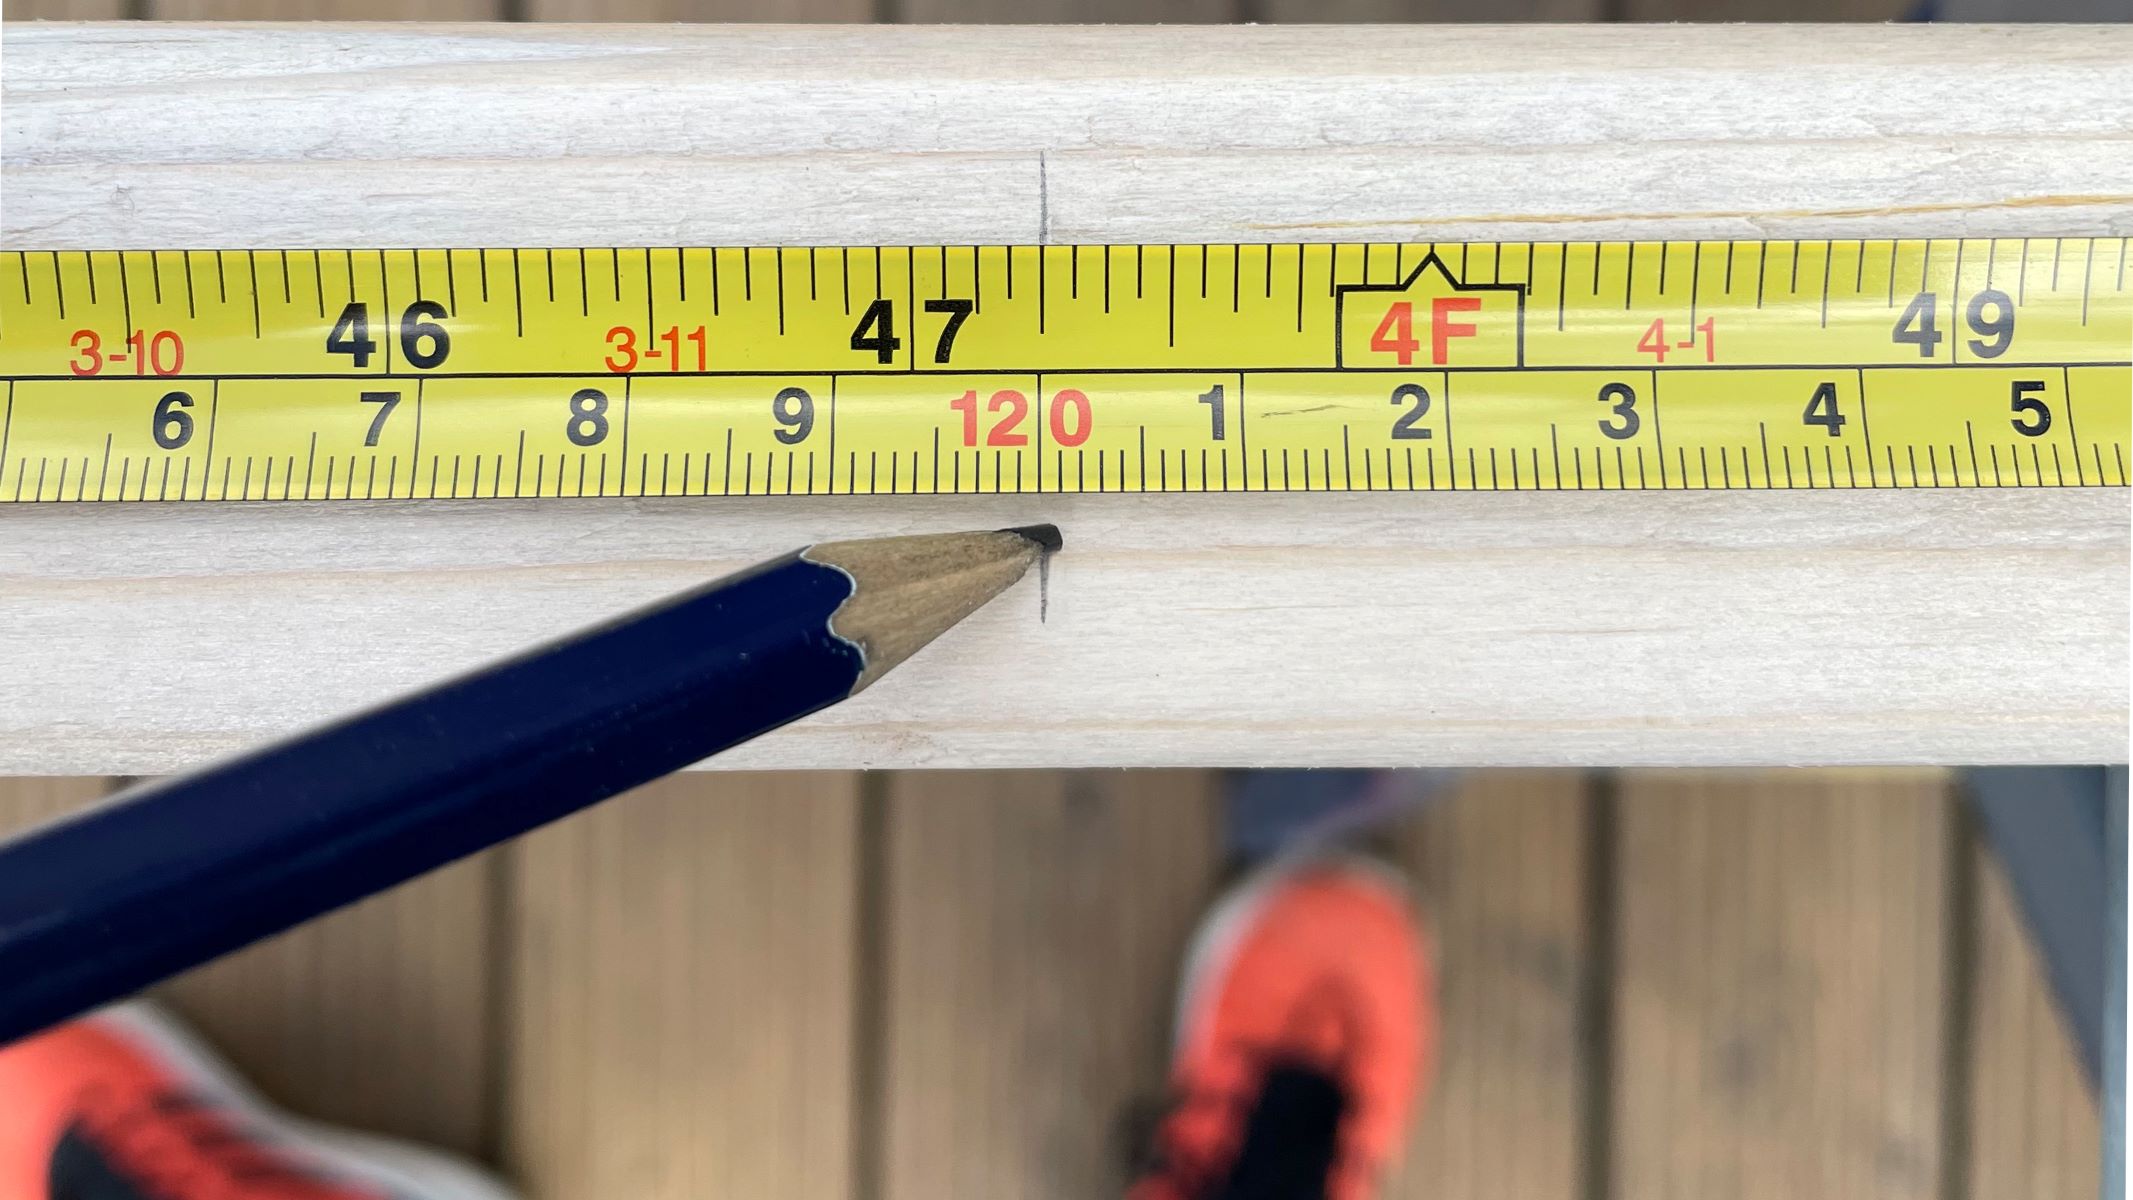 DIY Projects: How To Use A Tape Measure